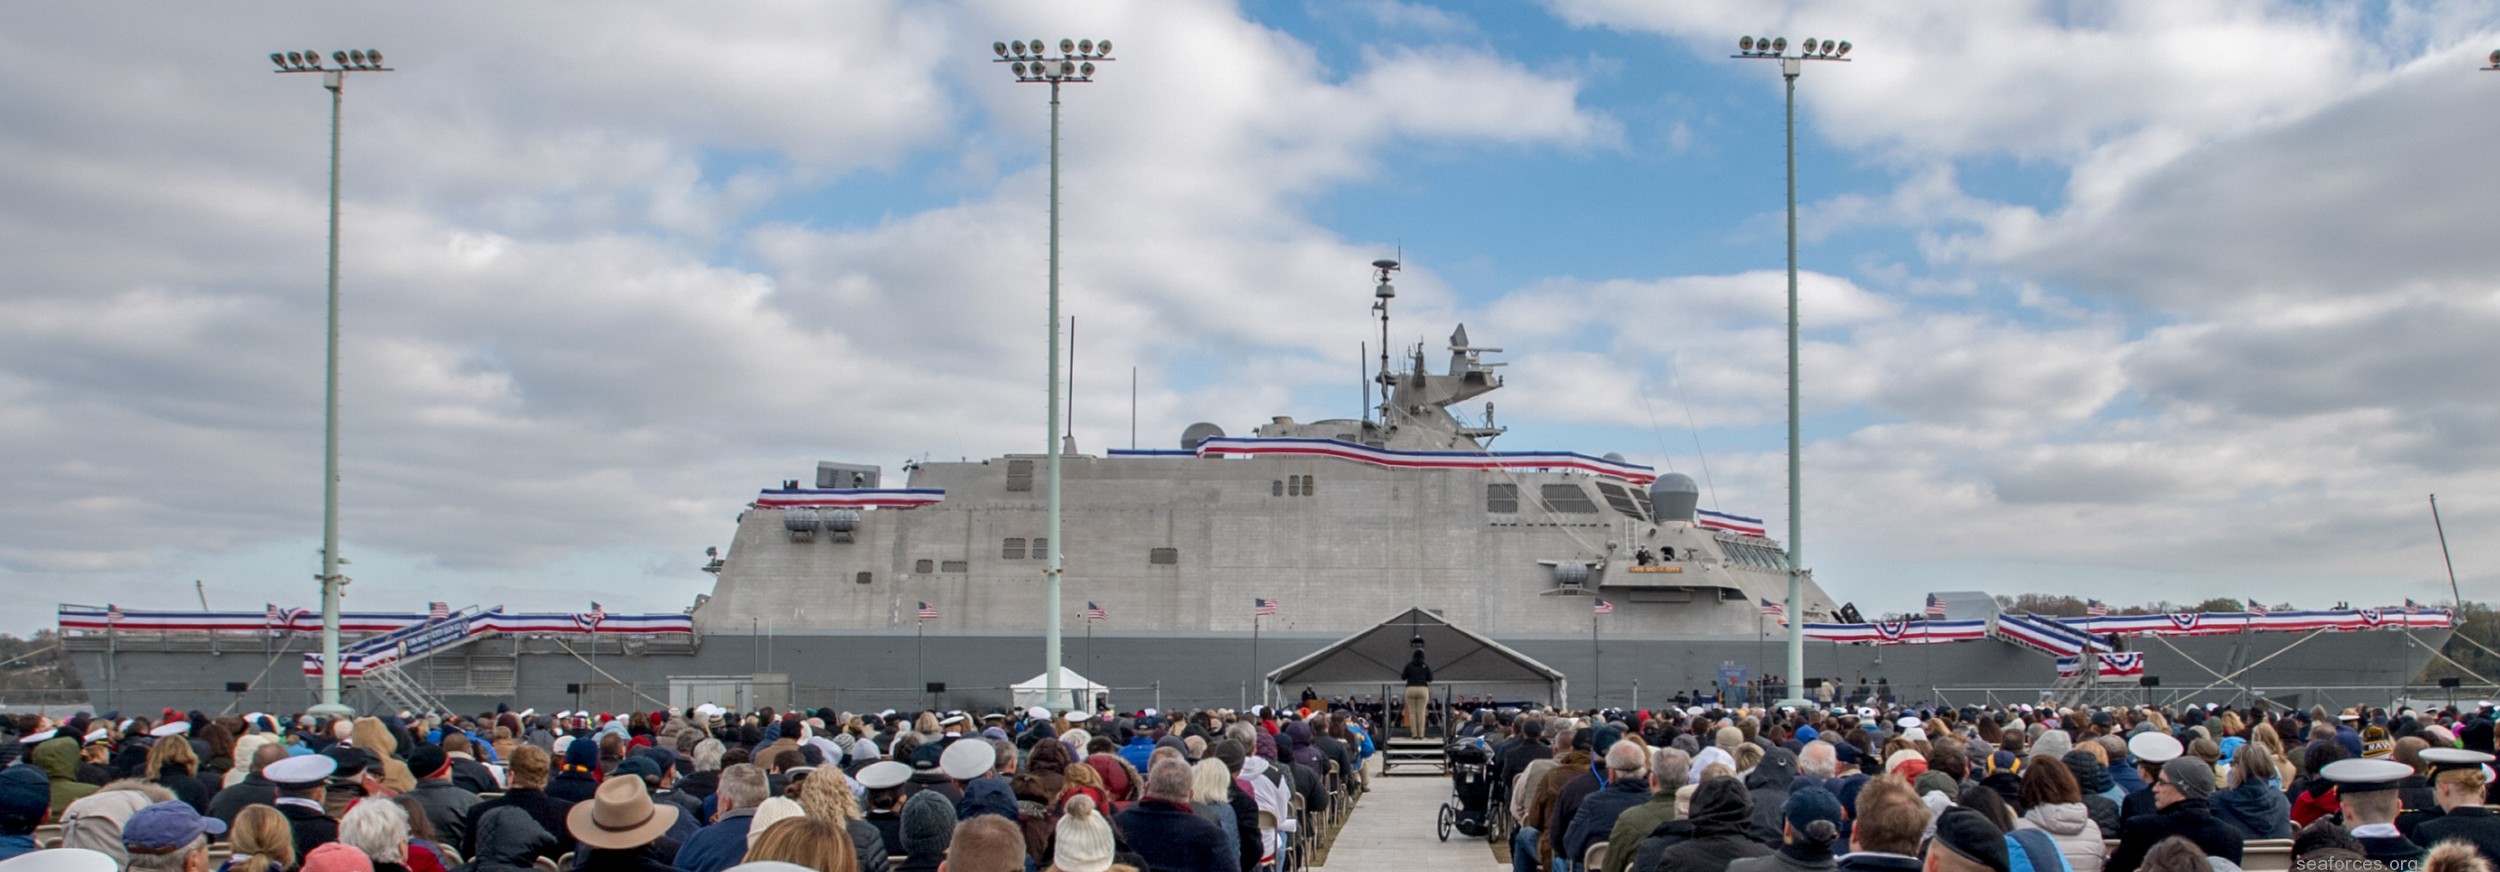 lcs-11 uss sioux city freedom class littoral combat ship 10 commissioning ceremony naval academy annapolis maryland